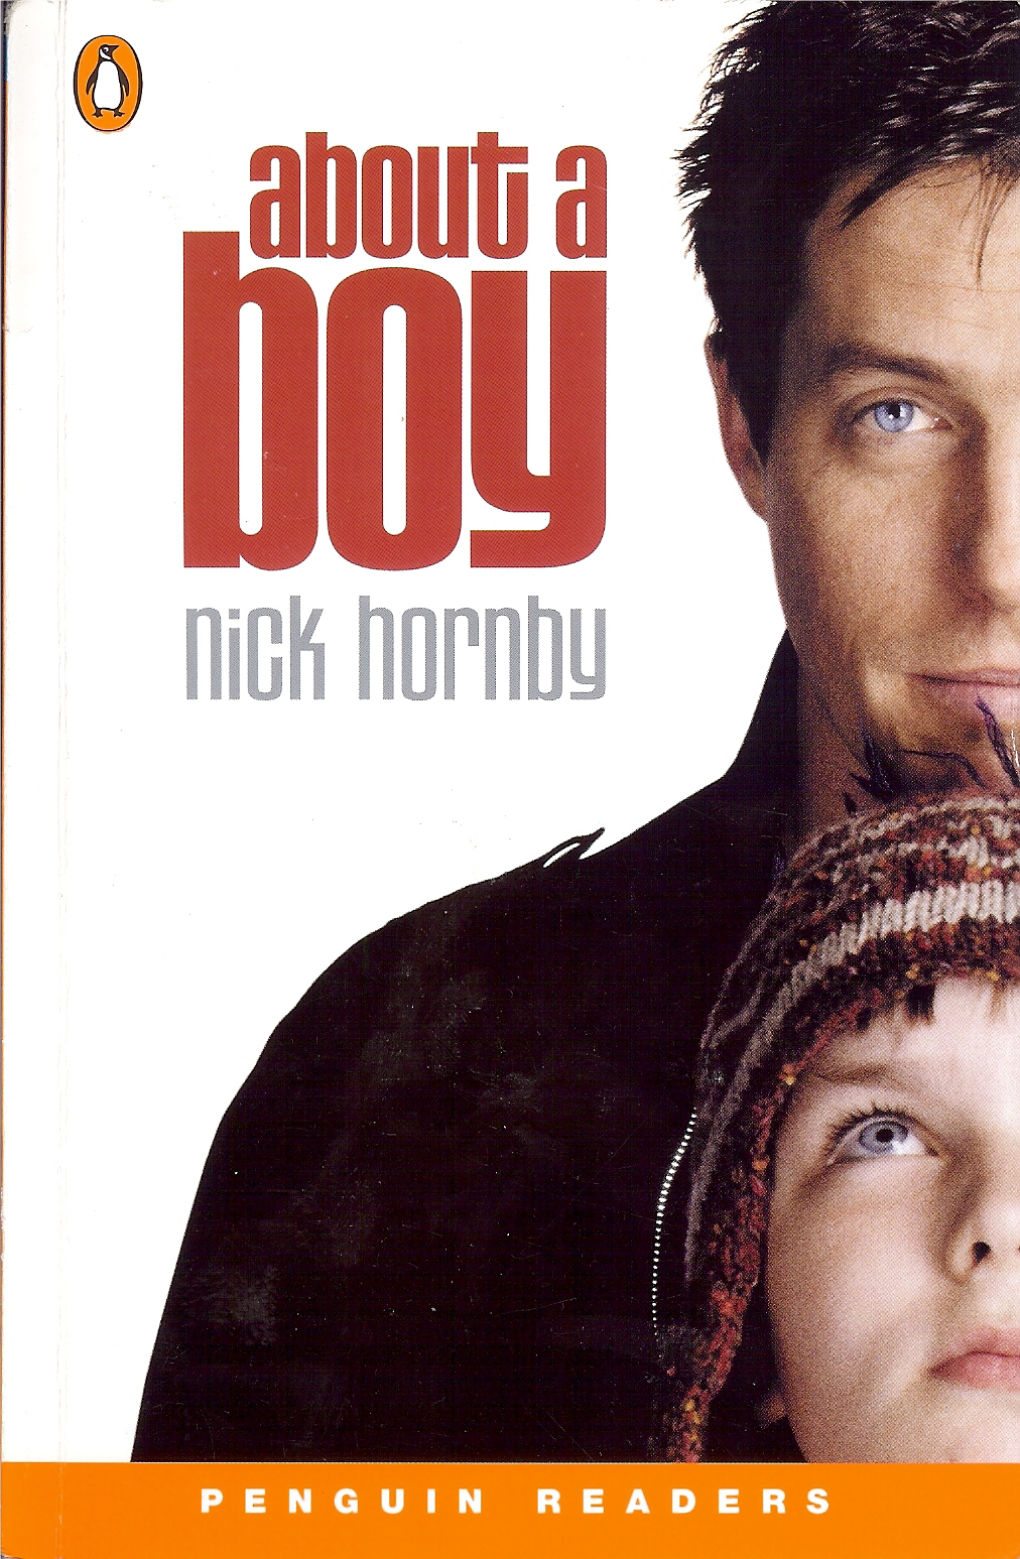 About a Boy Is the Story of the Growing Relationship Between with a Cool Lifestyle